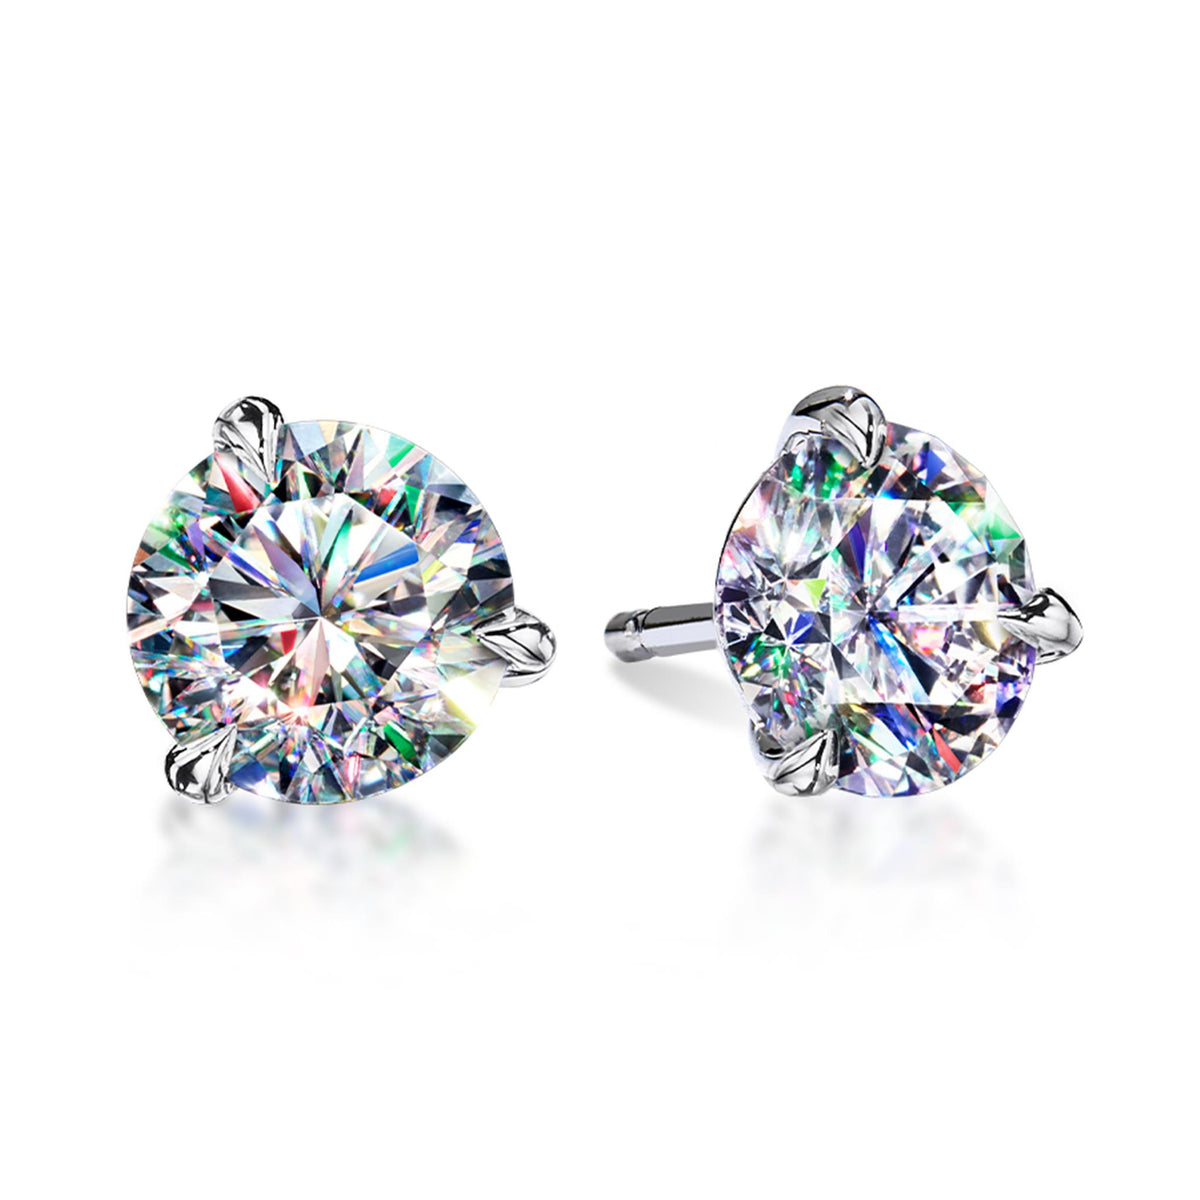 Facets Of Fire 14Kt White Gold Martini Stud Earrings With .50cttw Natural Diamonds